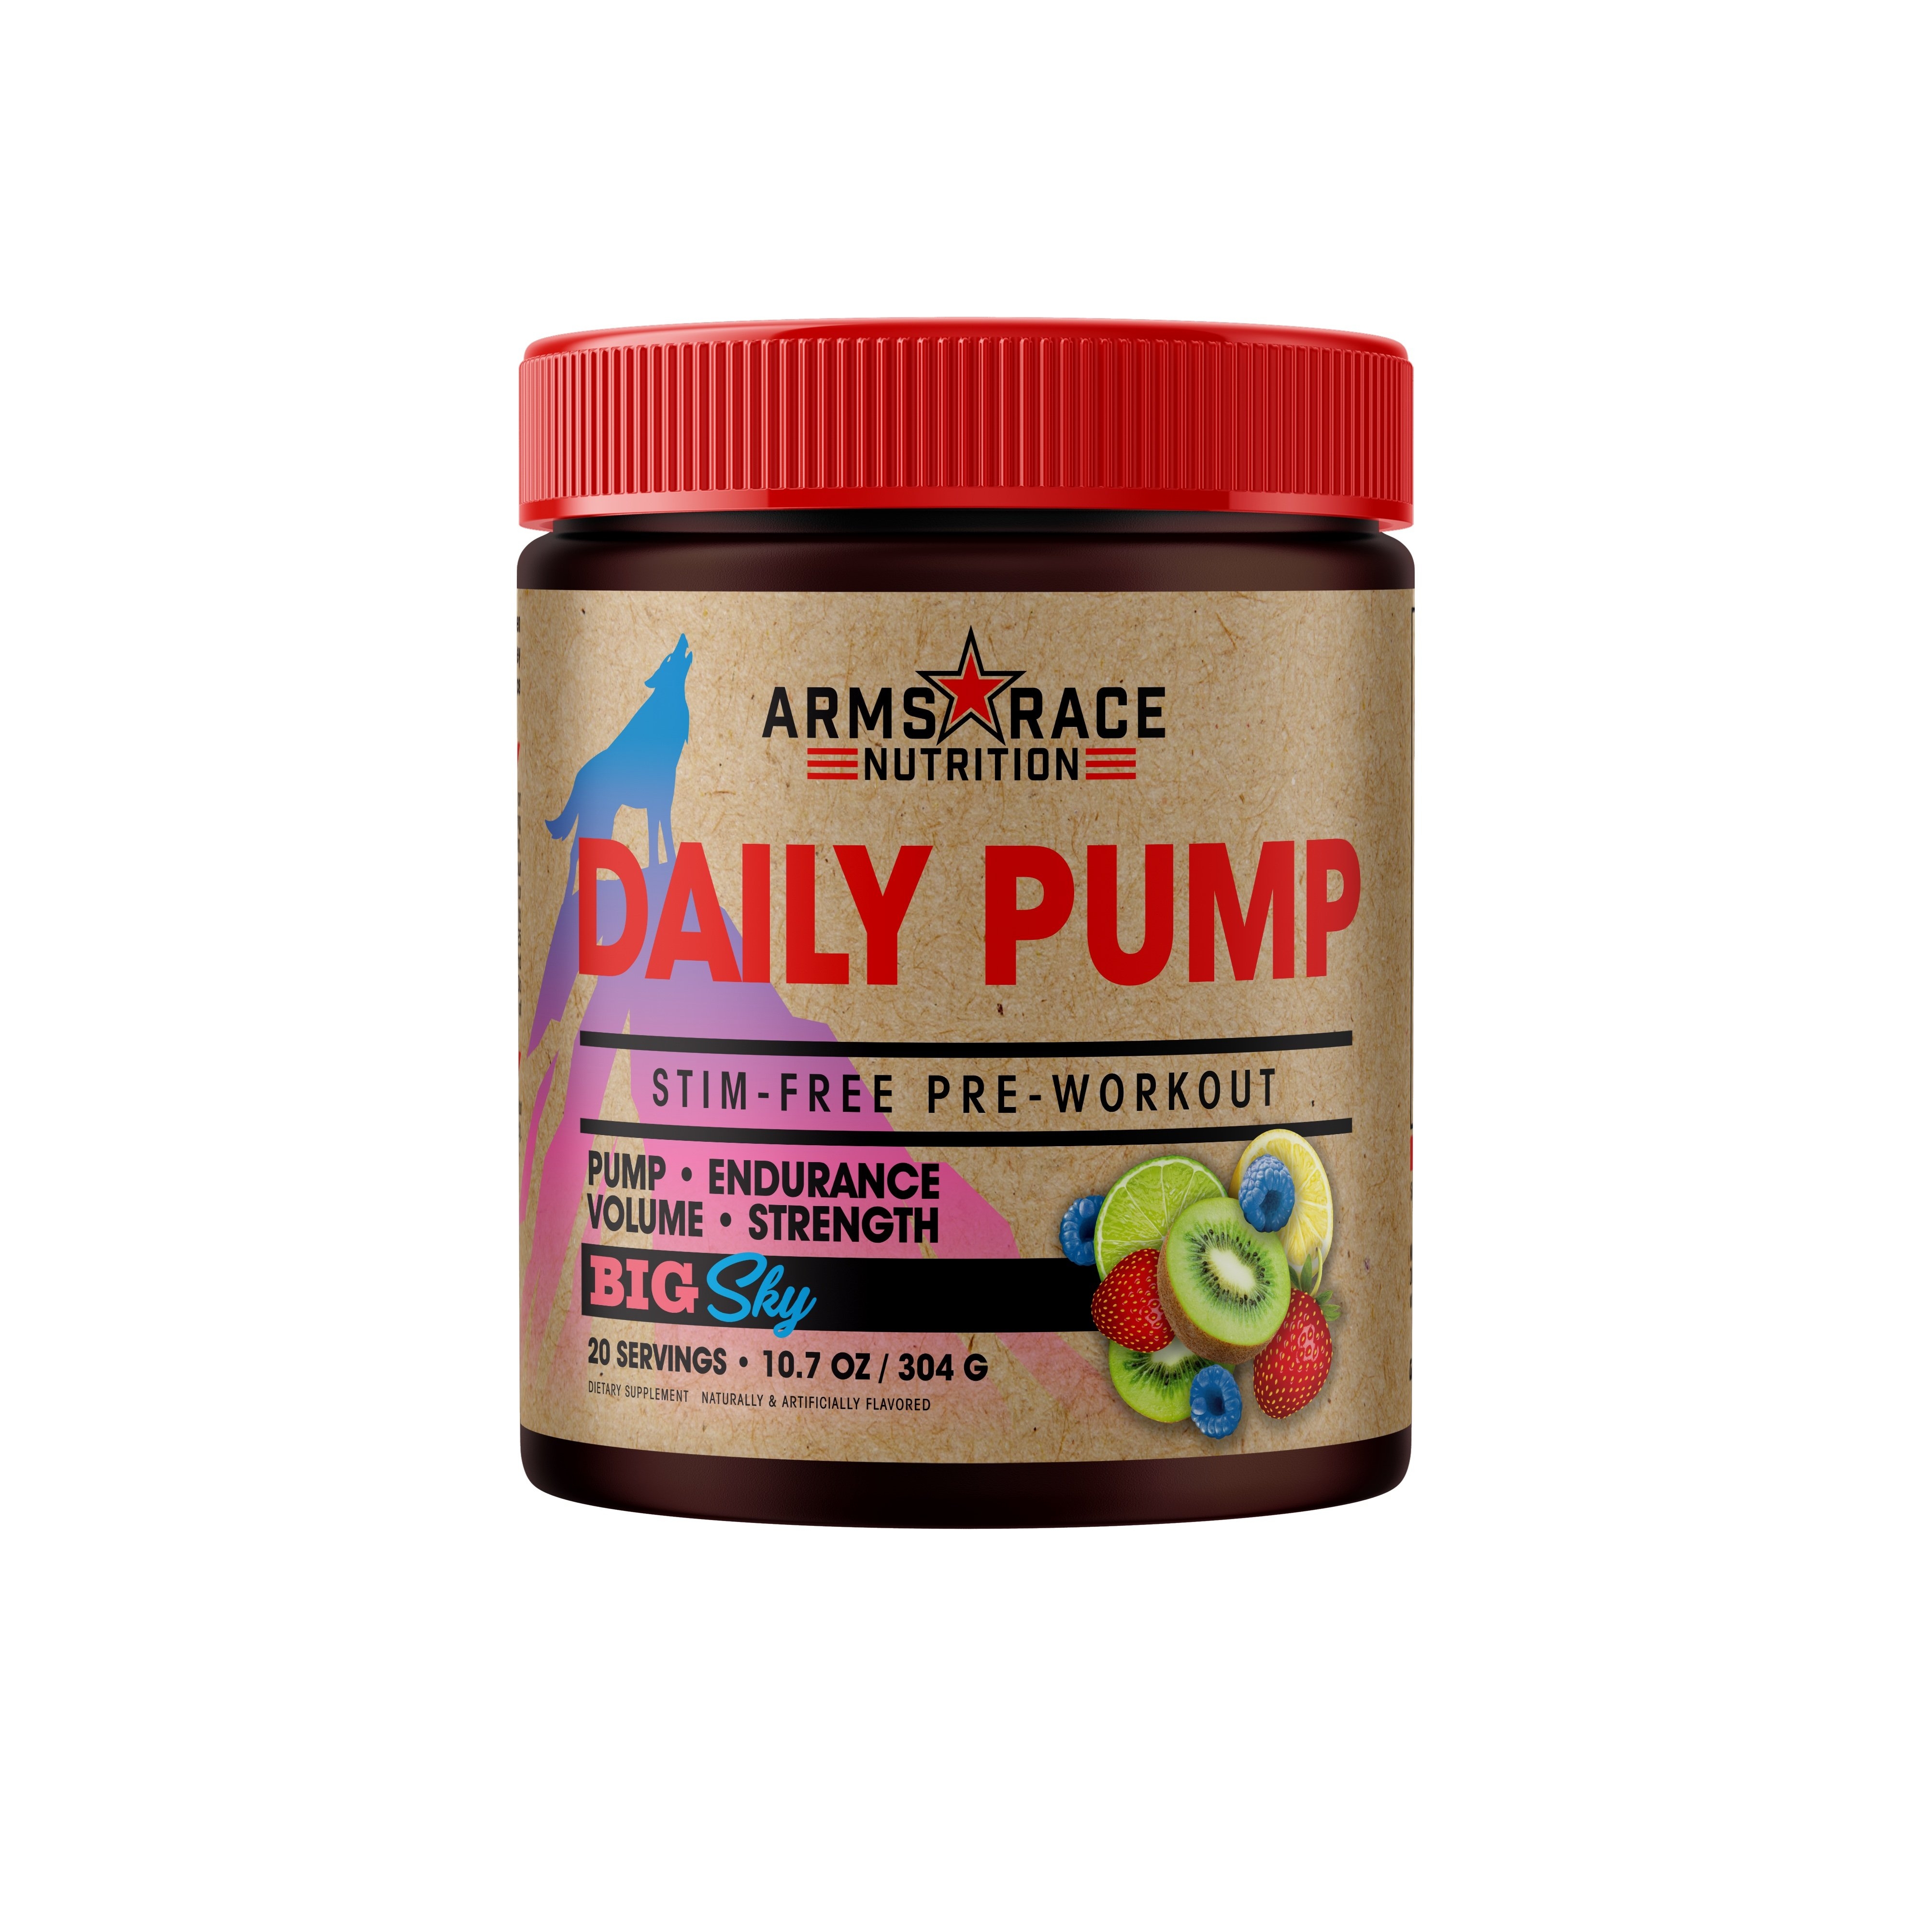 Arms Race Nutrition Daily Pump – Pre-Workout – Professional Supplements & Protein From A-list Nutrition